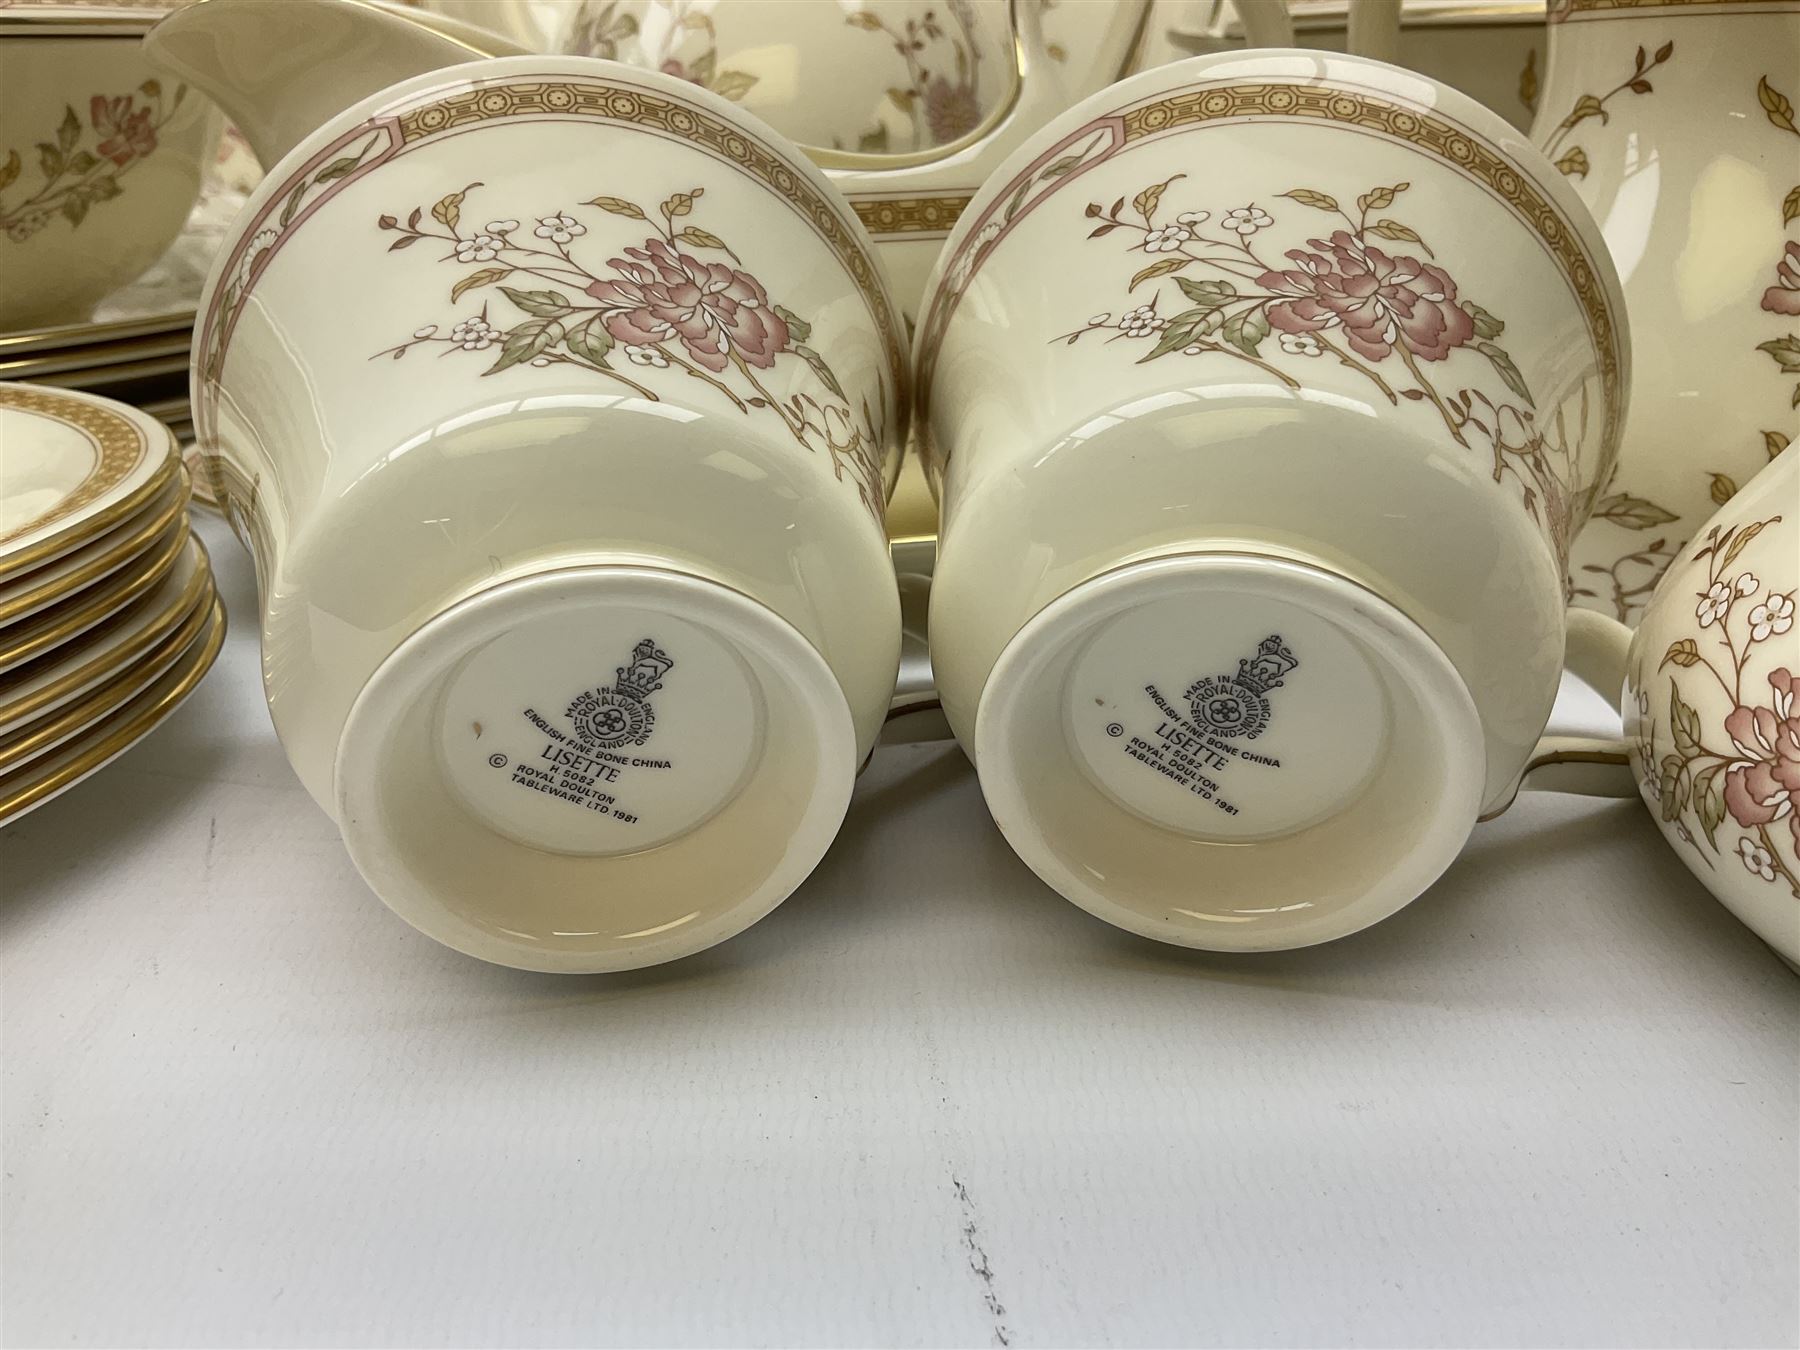 Royal Doulton ‘The Romance Collection’ dinner service decorated in the ‘Lisette’ pattern for six - Image 2 of 4